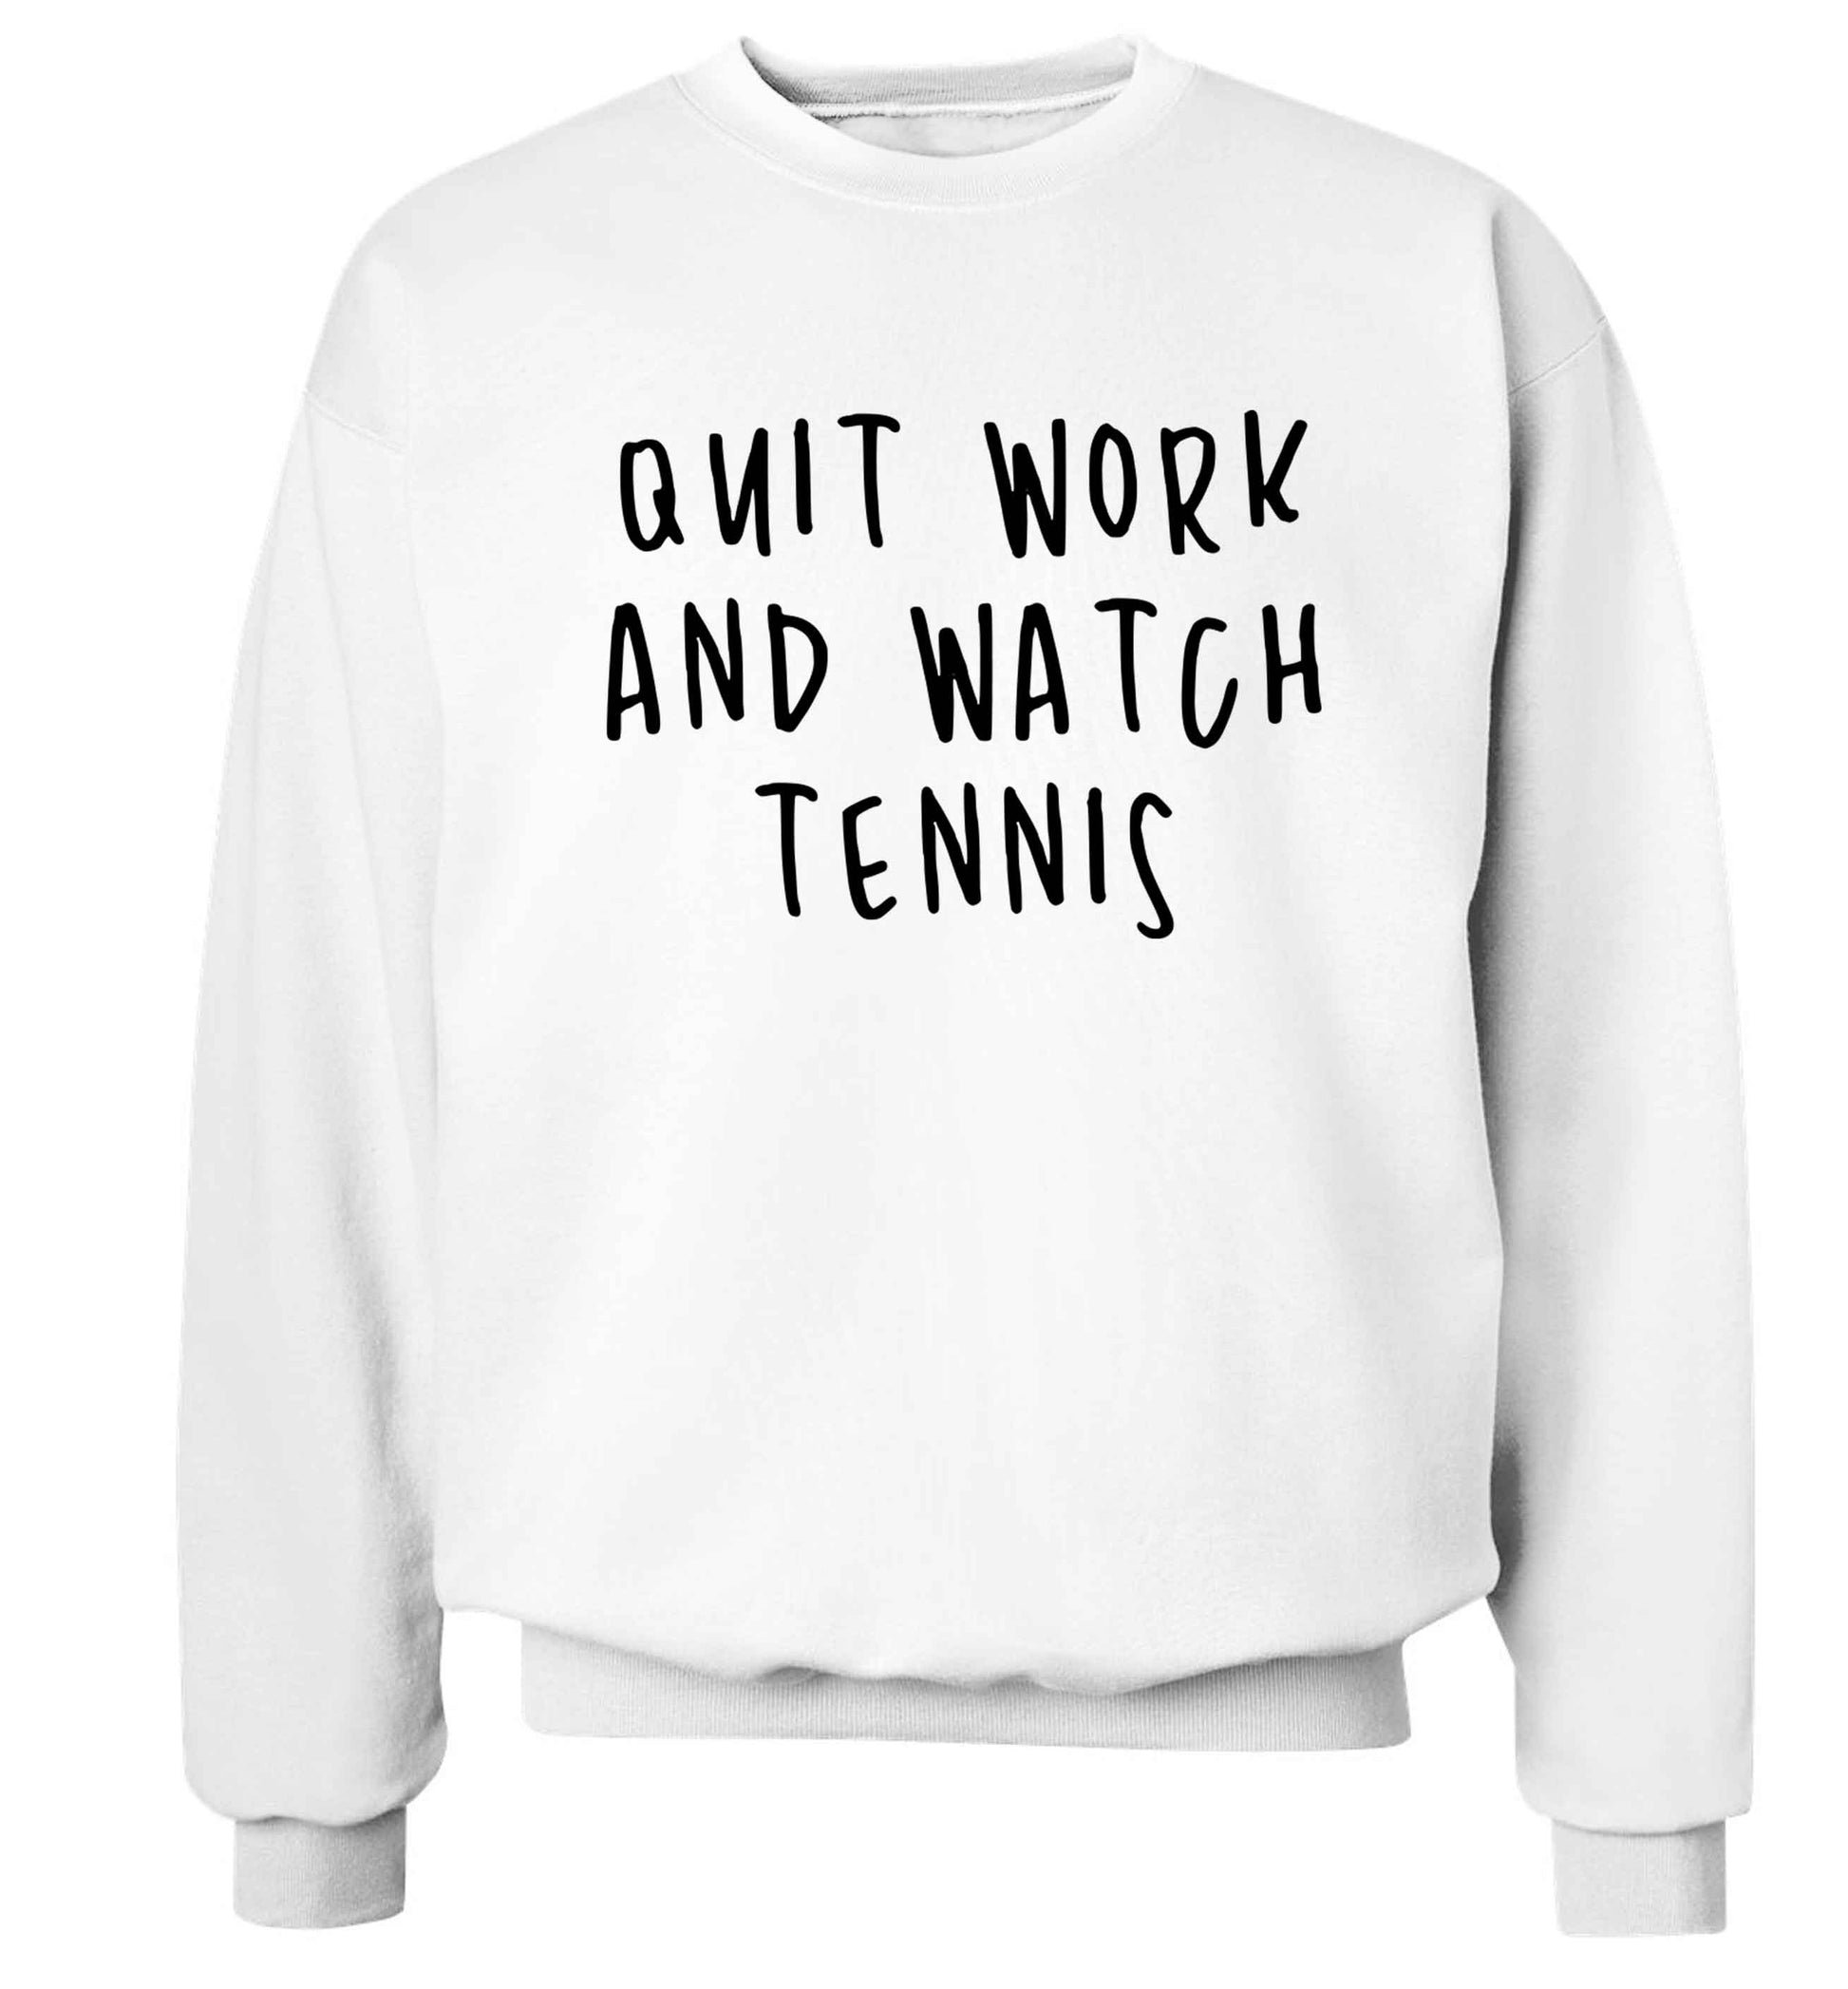 Quit work and watch tennis Adult's unisex white Sweater 2XL